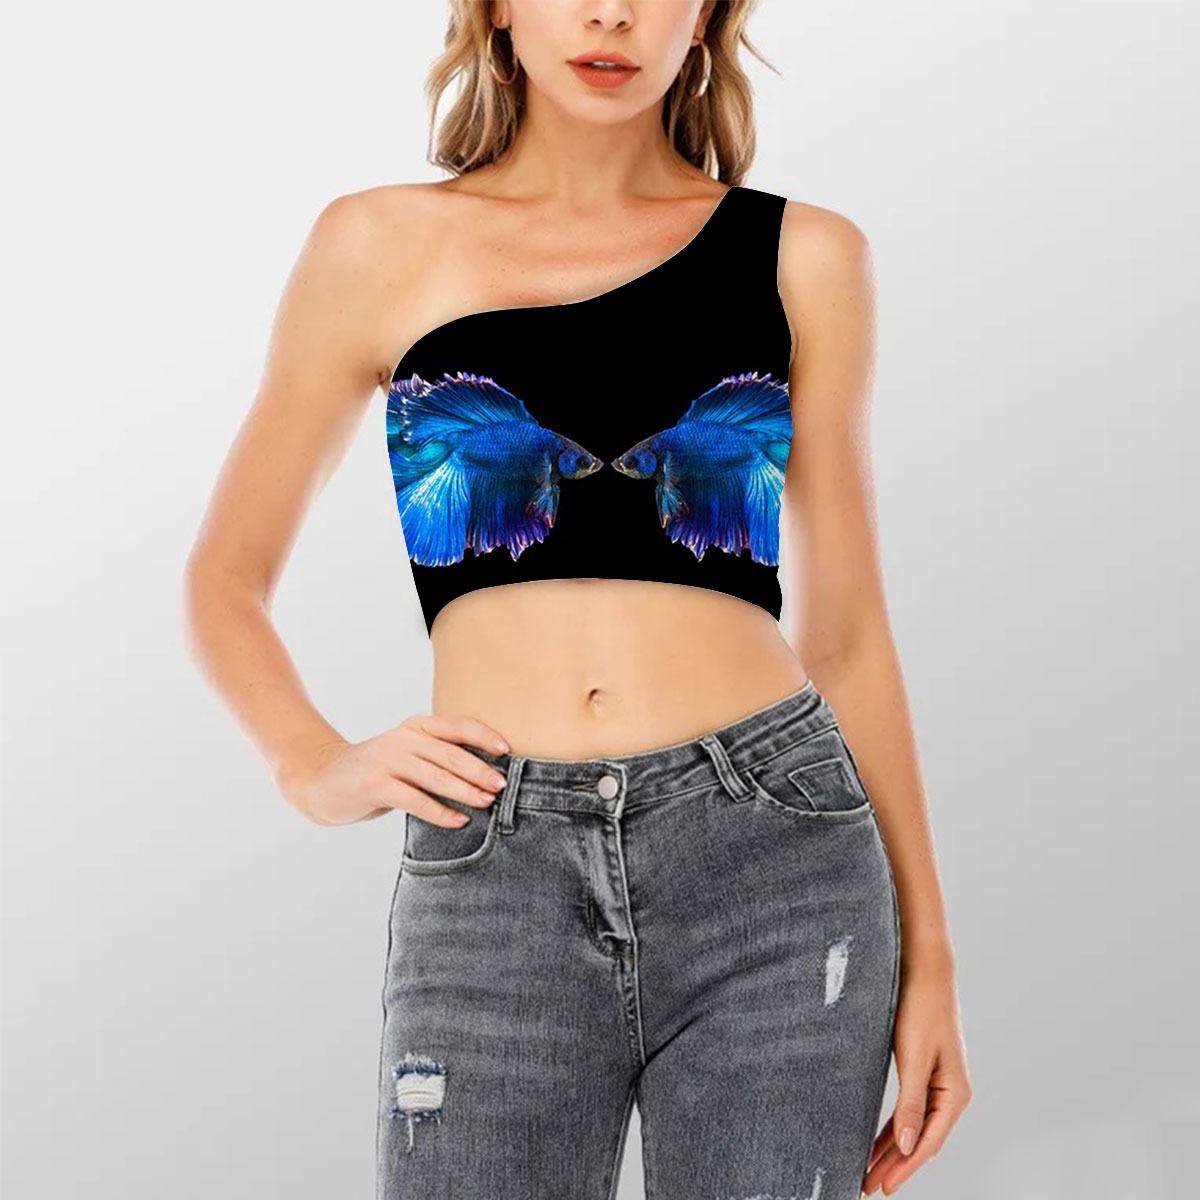 Fighting Betta Fish Shoulder Cropped Top